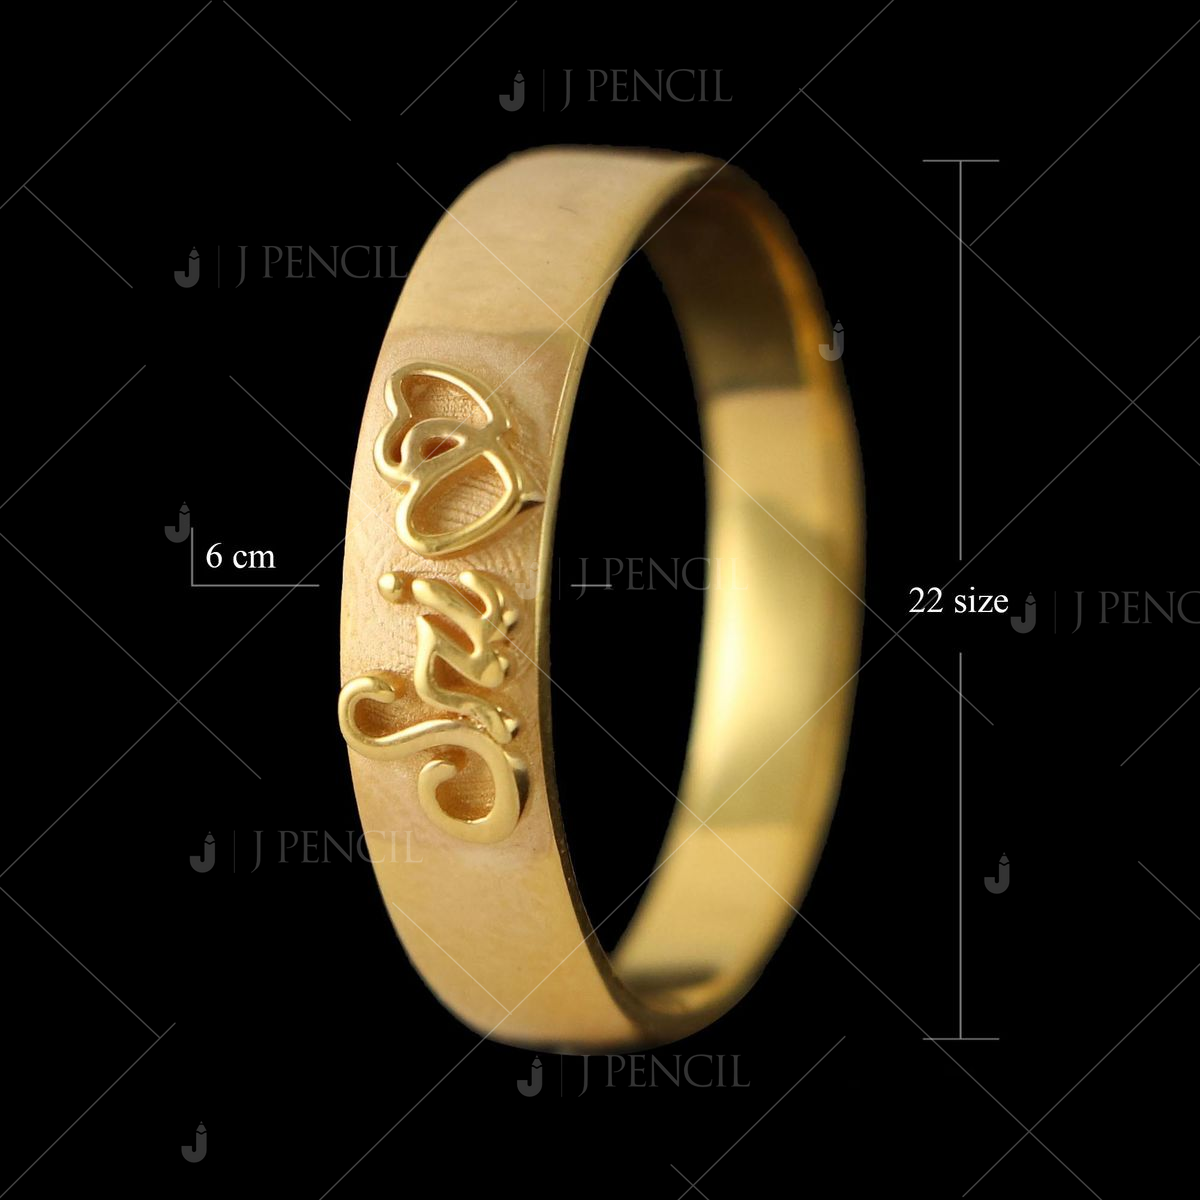 Men's Classic Accents Polished Edges Wedding Band in Yellow Gold 10K 6mm  Size 10 | MADANI Rings